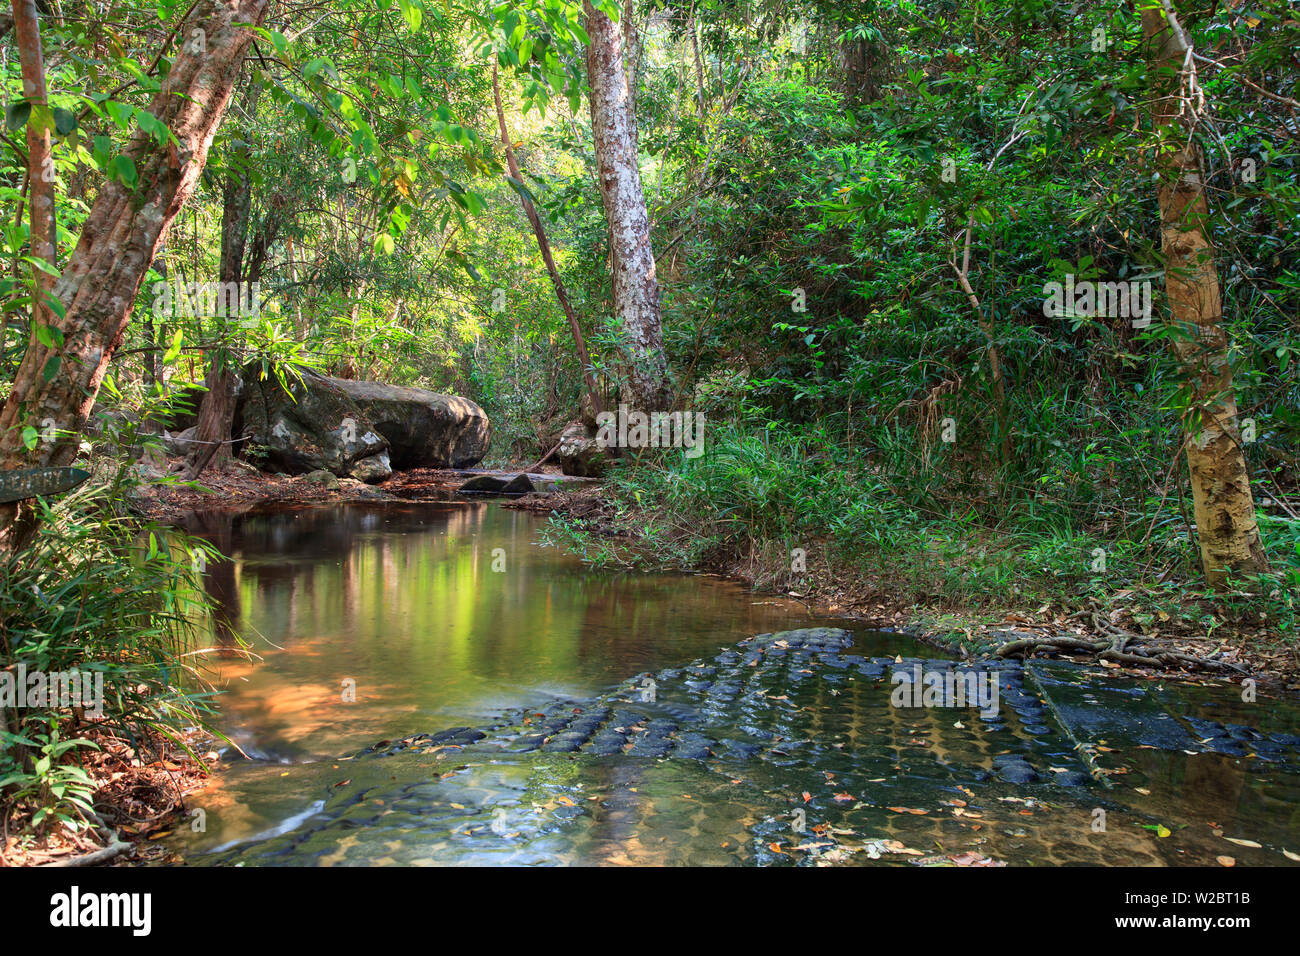 Cambodia, Temples of Angkor (UNESCO site), Kbal Spean, riverbed carving of Lingas (phallic symbols) Stock Photo